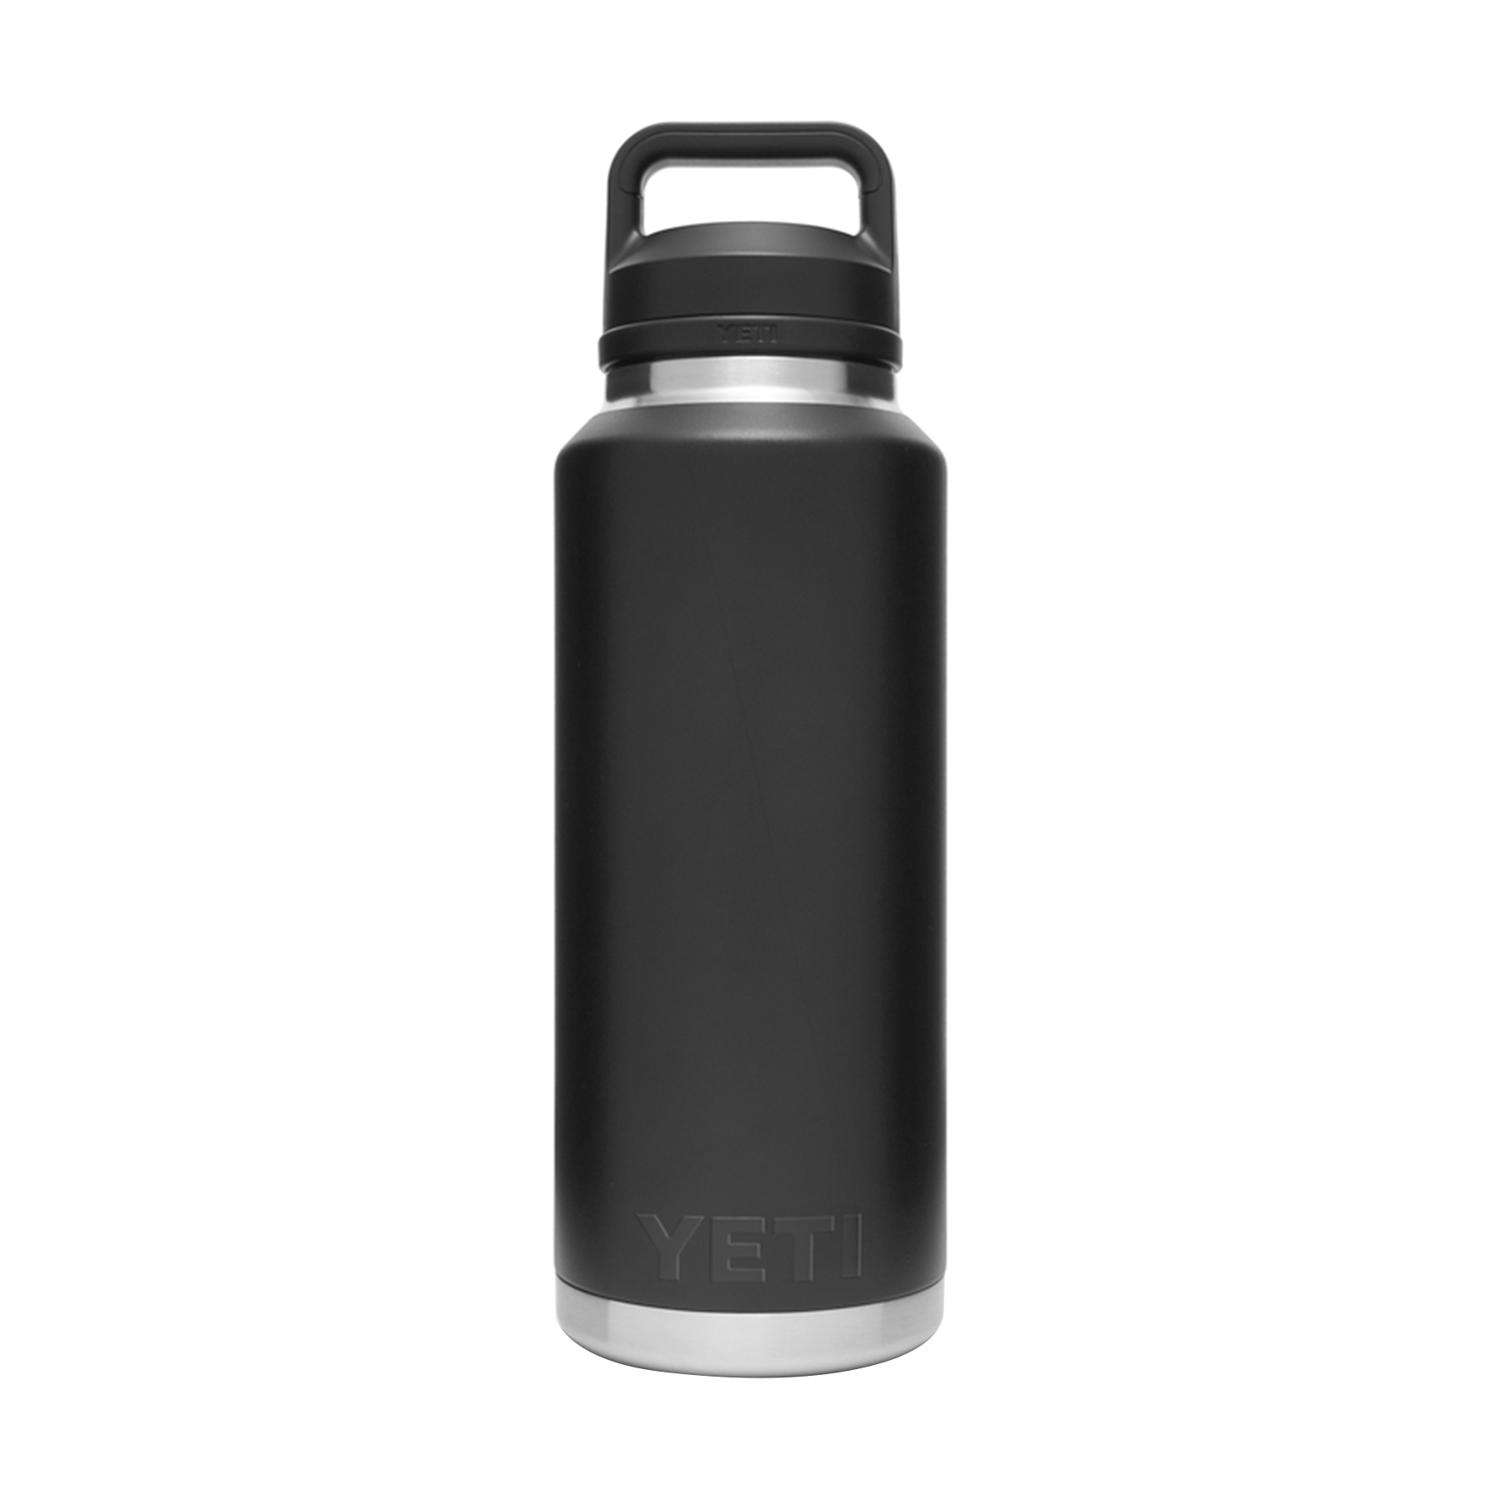 The latest from YETI is here! YETI Black Stone is textured, and is